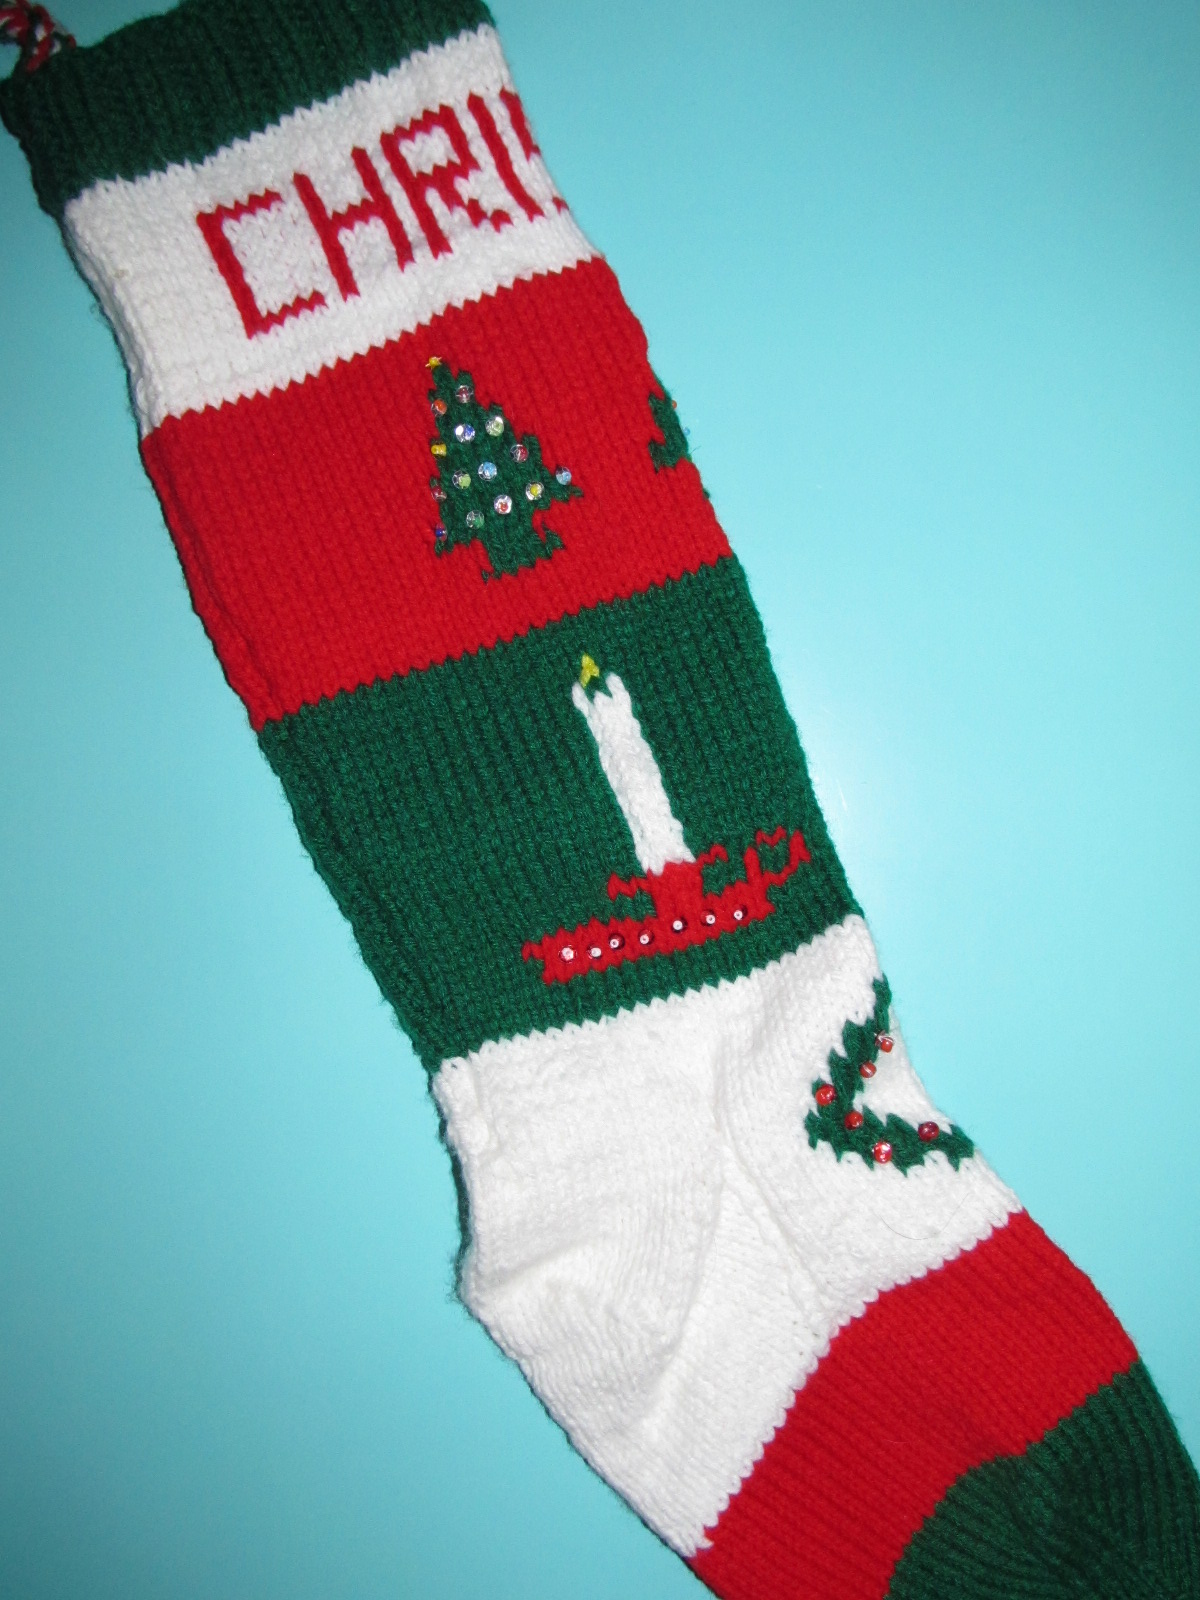 Search Results for "Xmas Stocking Patterns" - Calendar 2015